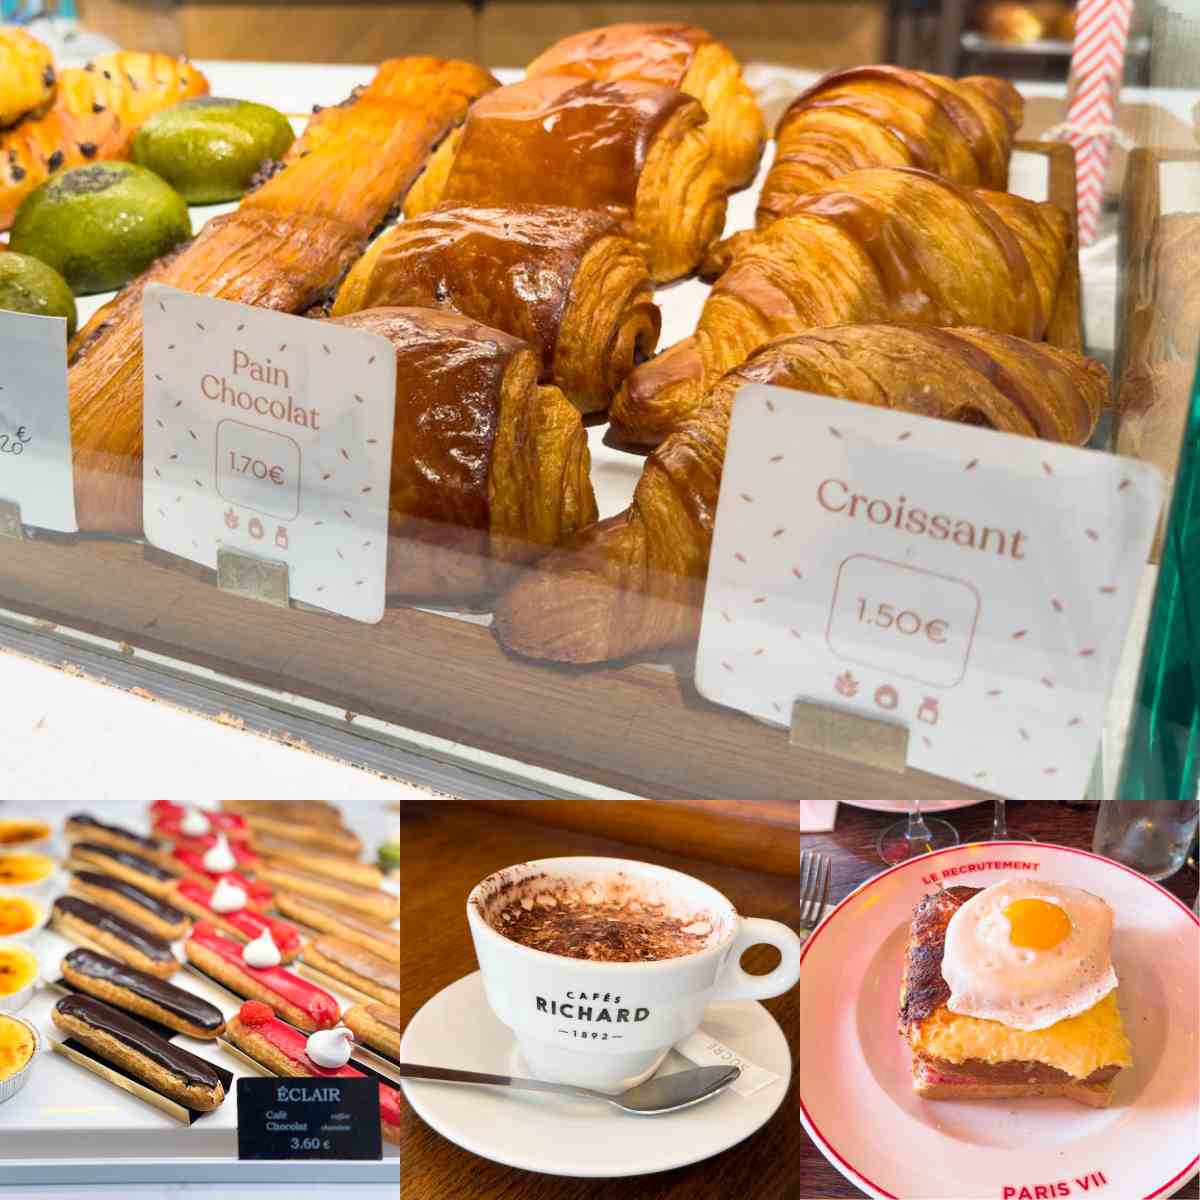 The photo collage shows croissants, eclairs, hot chocolate and a croque madame.